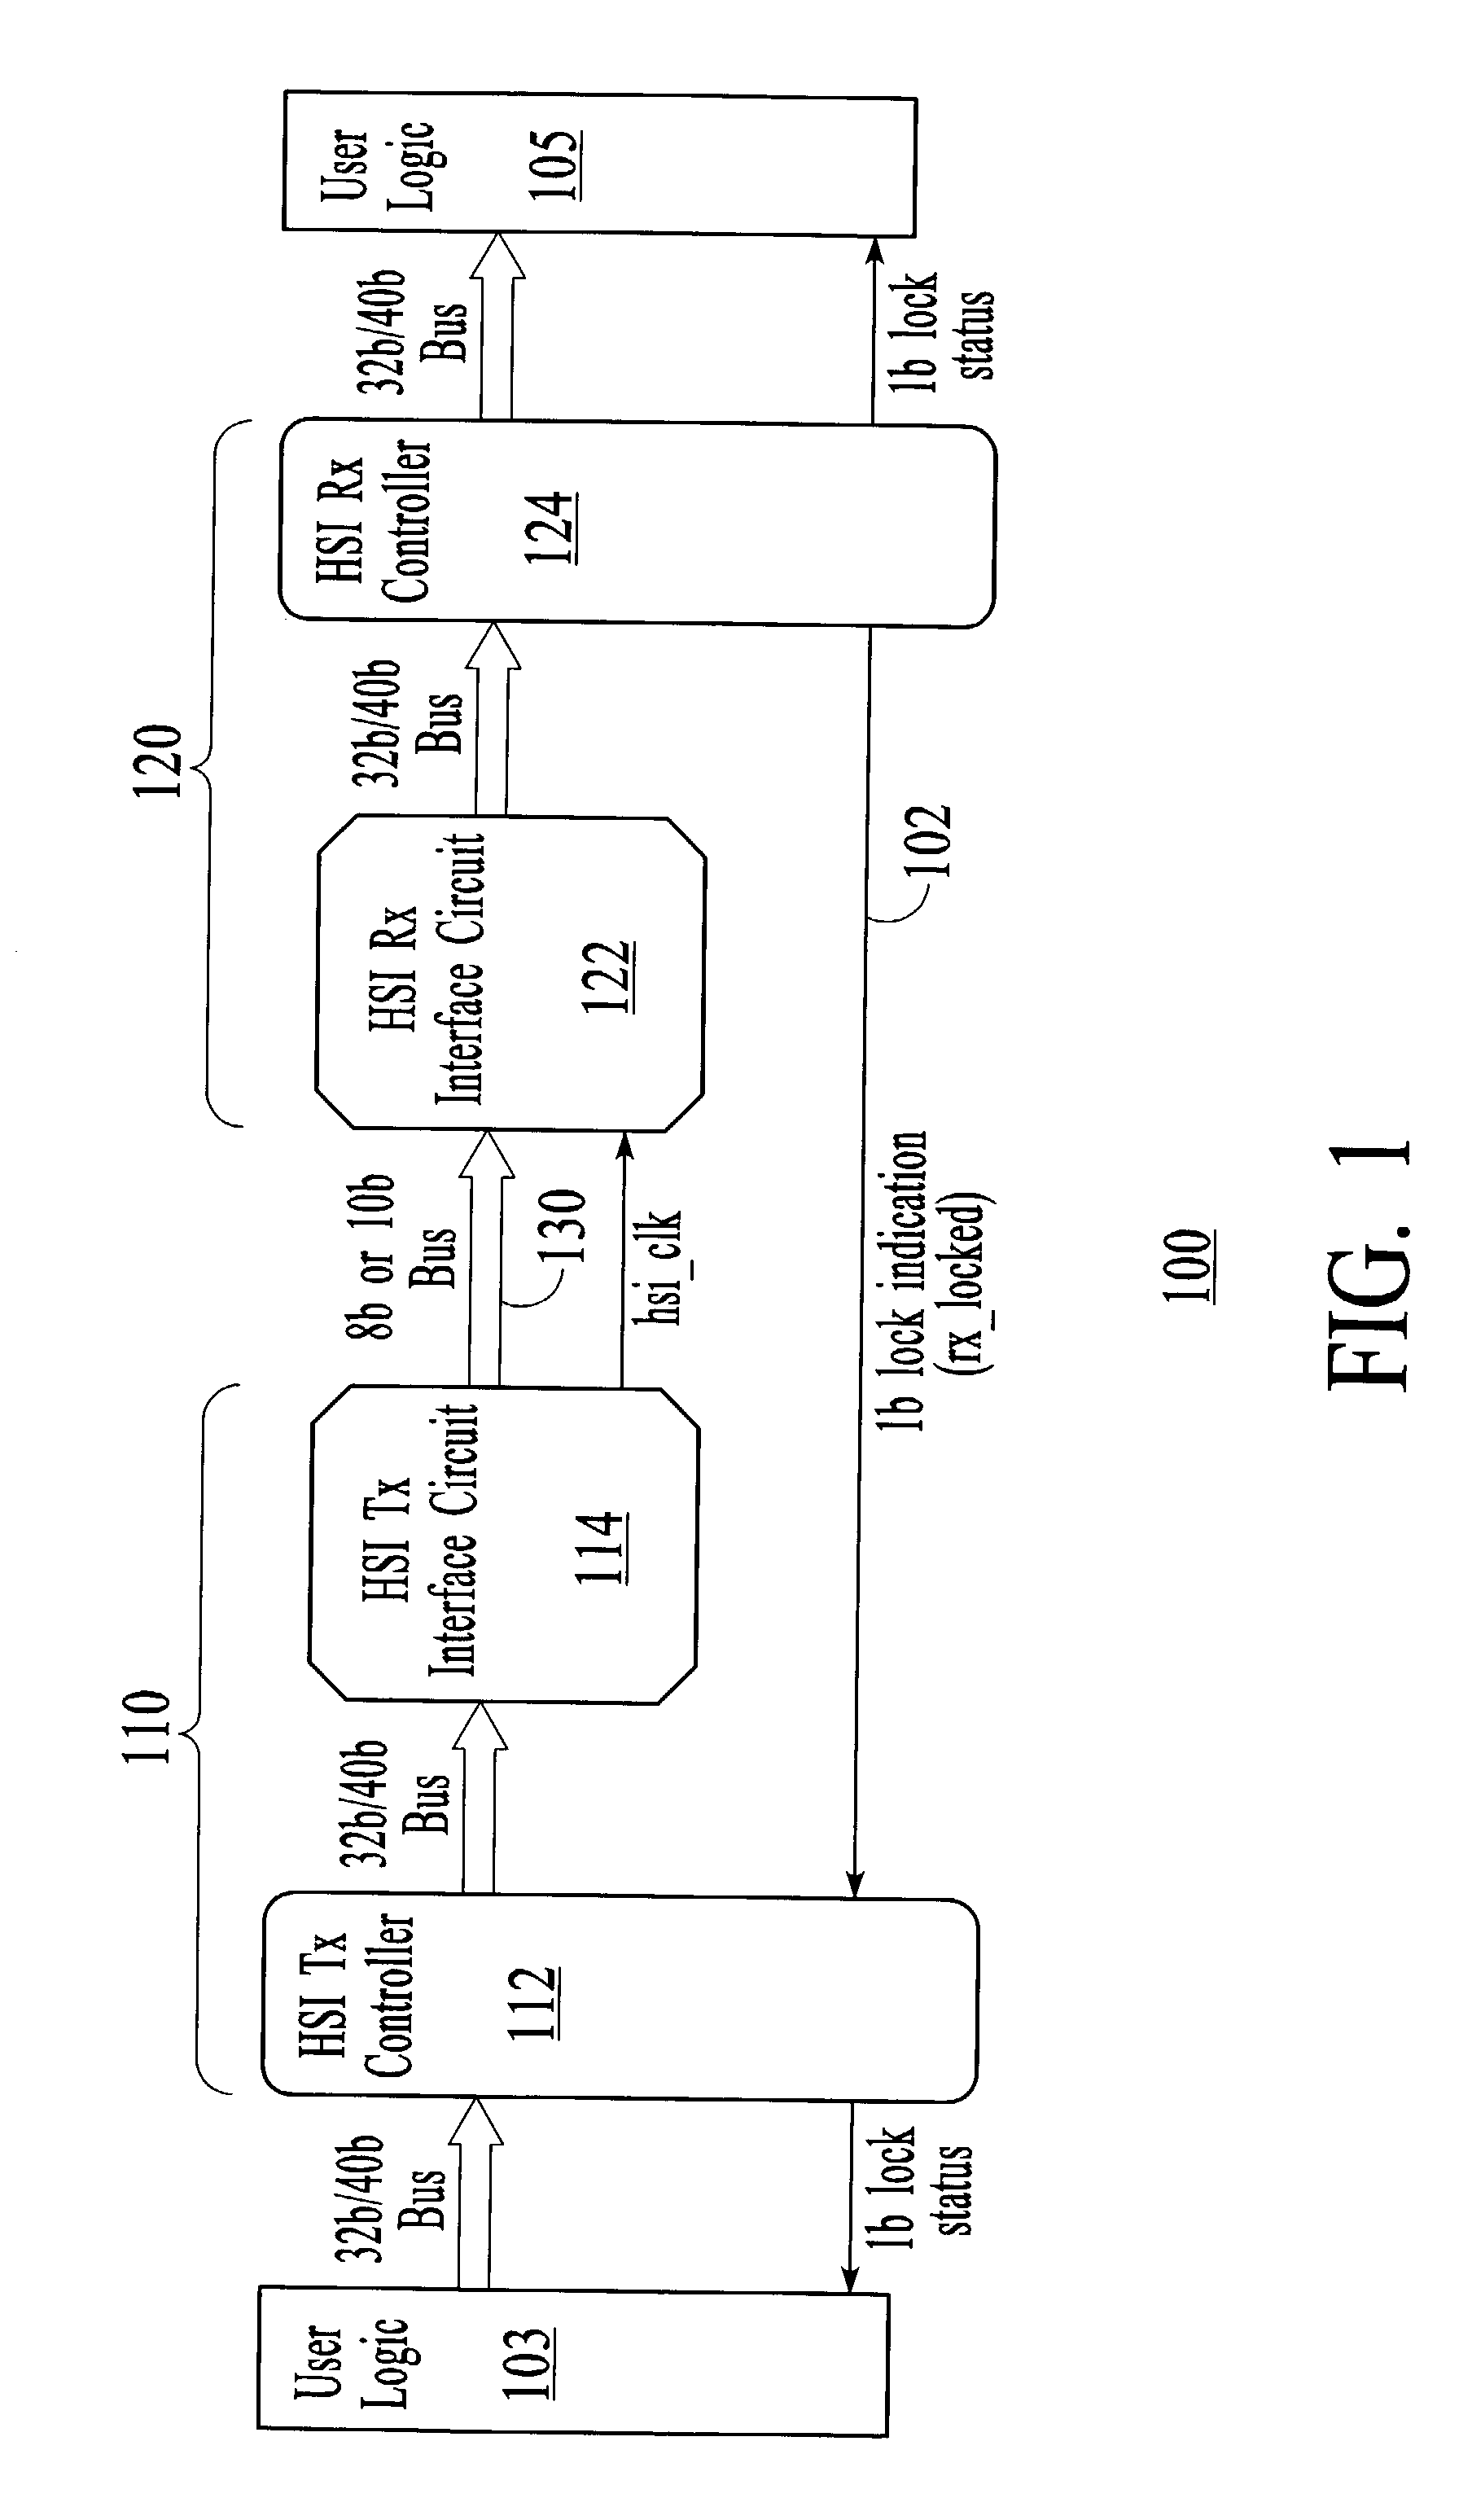 High-speed chip-to-chip communication interface